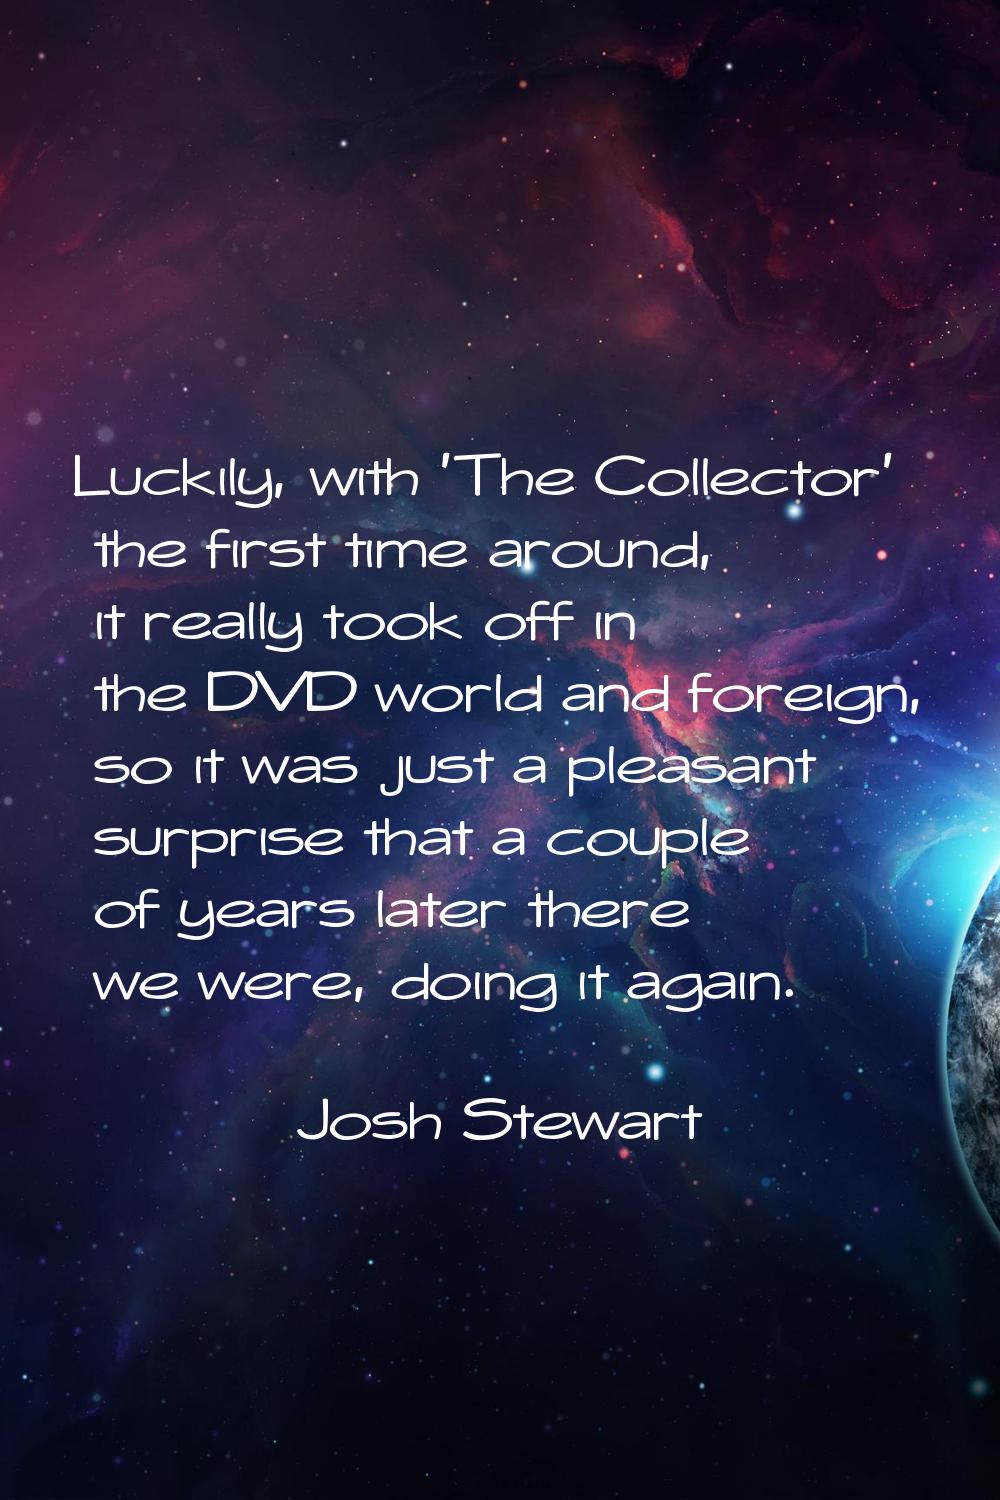 Luckily, with 'The Collector' the first time around, it really took off in the DVD world and foreig